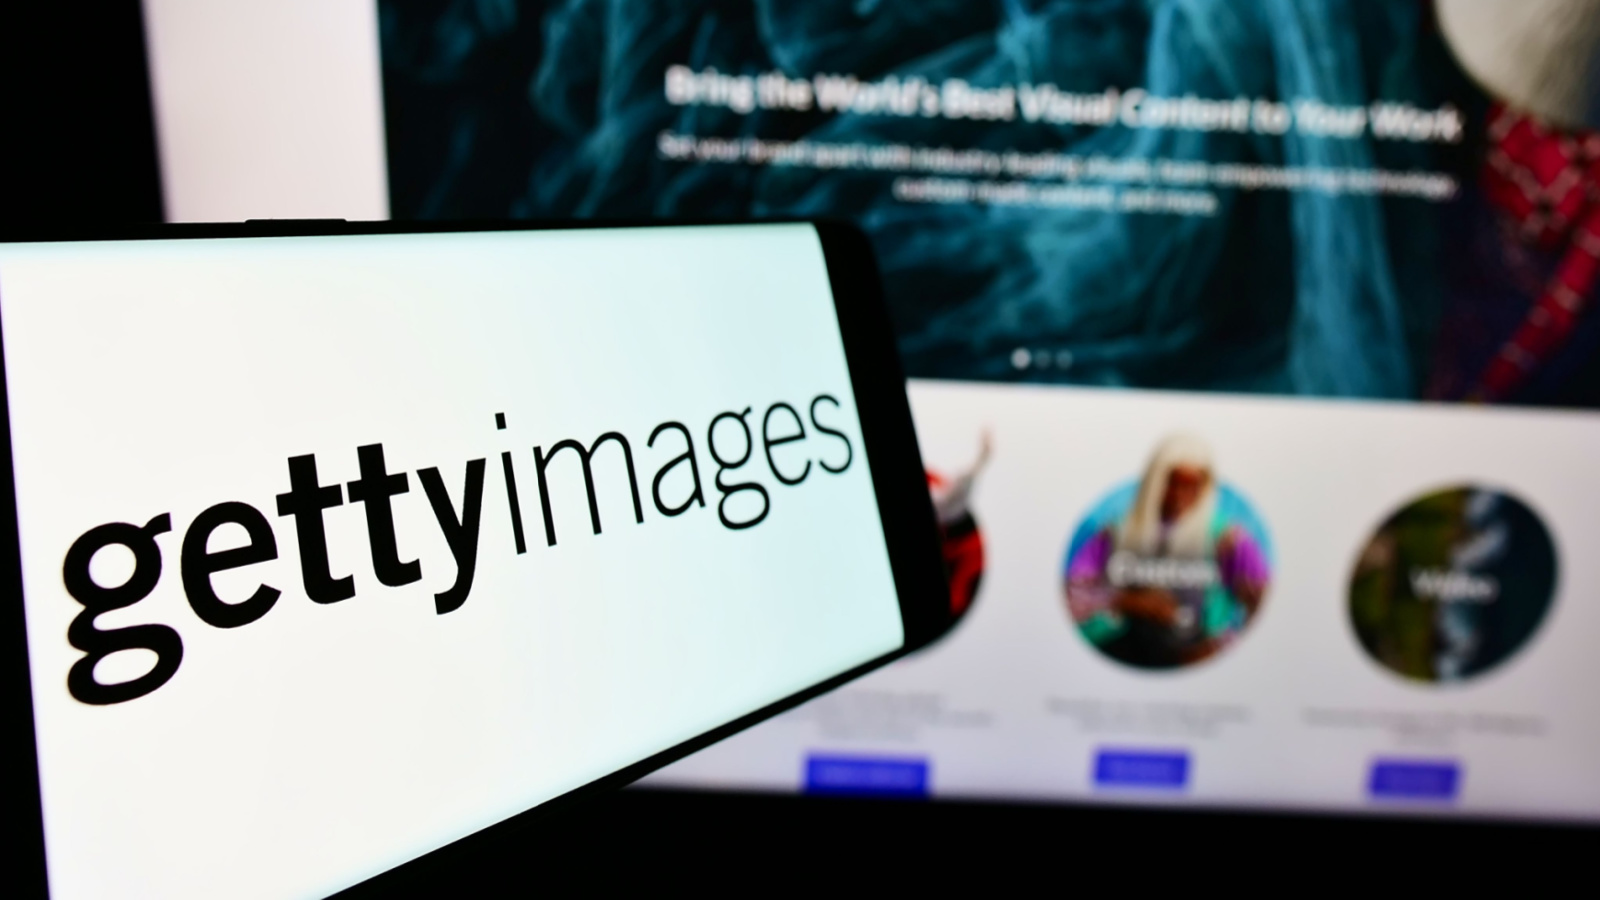 GettyImages (GETY Stock) logo on a smartphone in front of a computer.